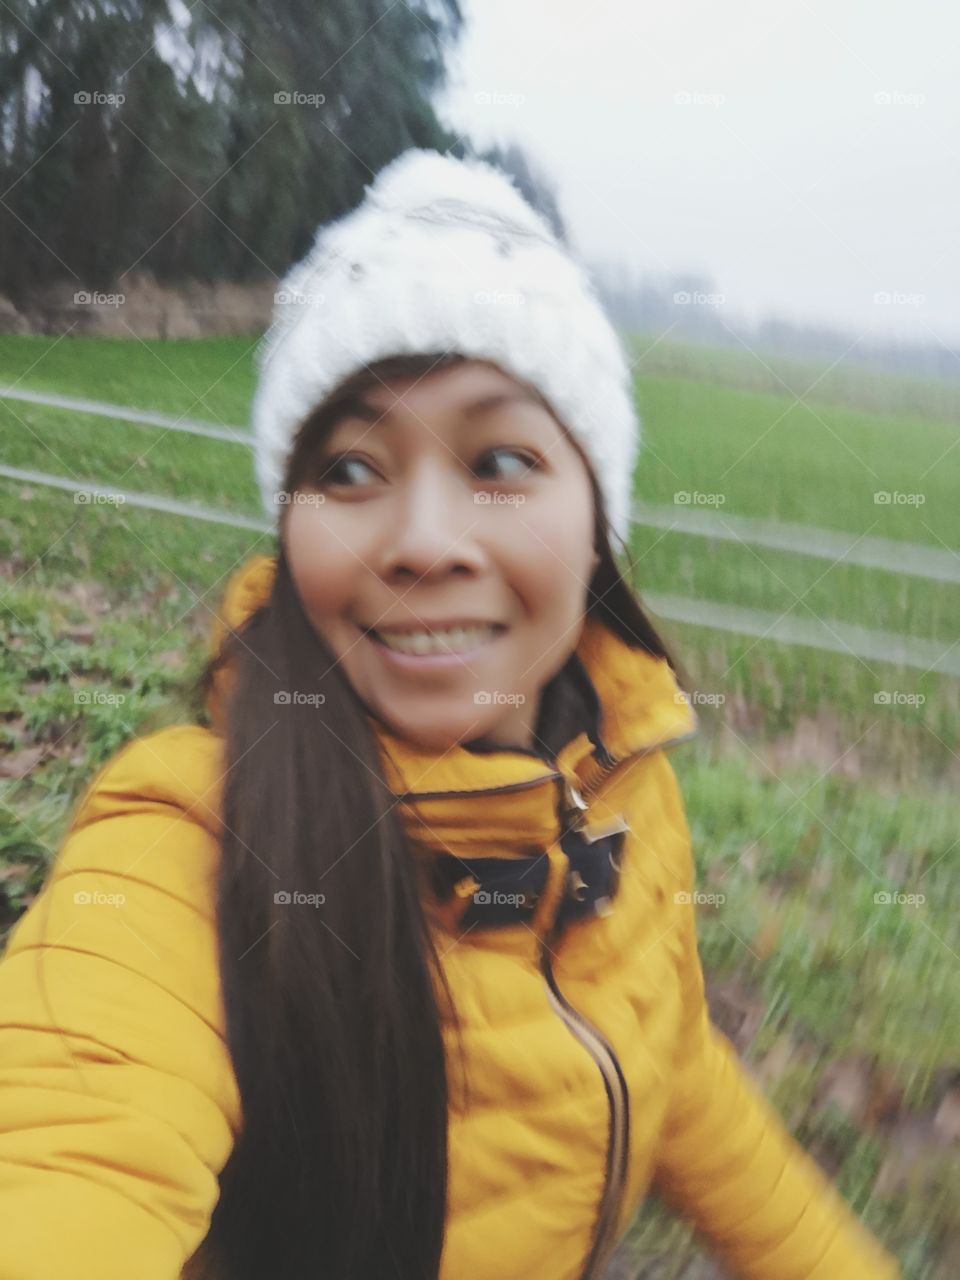 Moving run blur young woman coat cold winter filed nature selfie grass white hat yellow happy smile